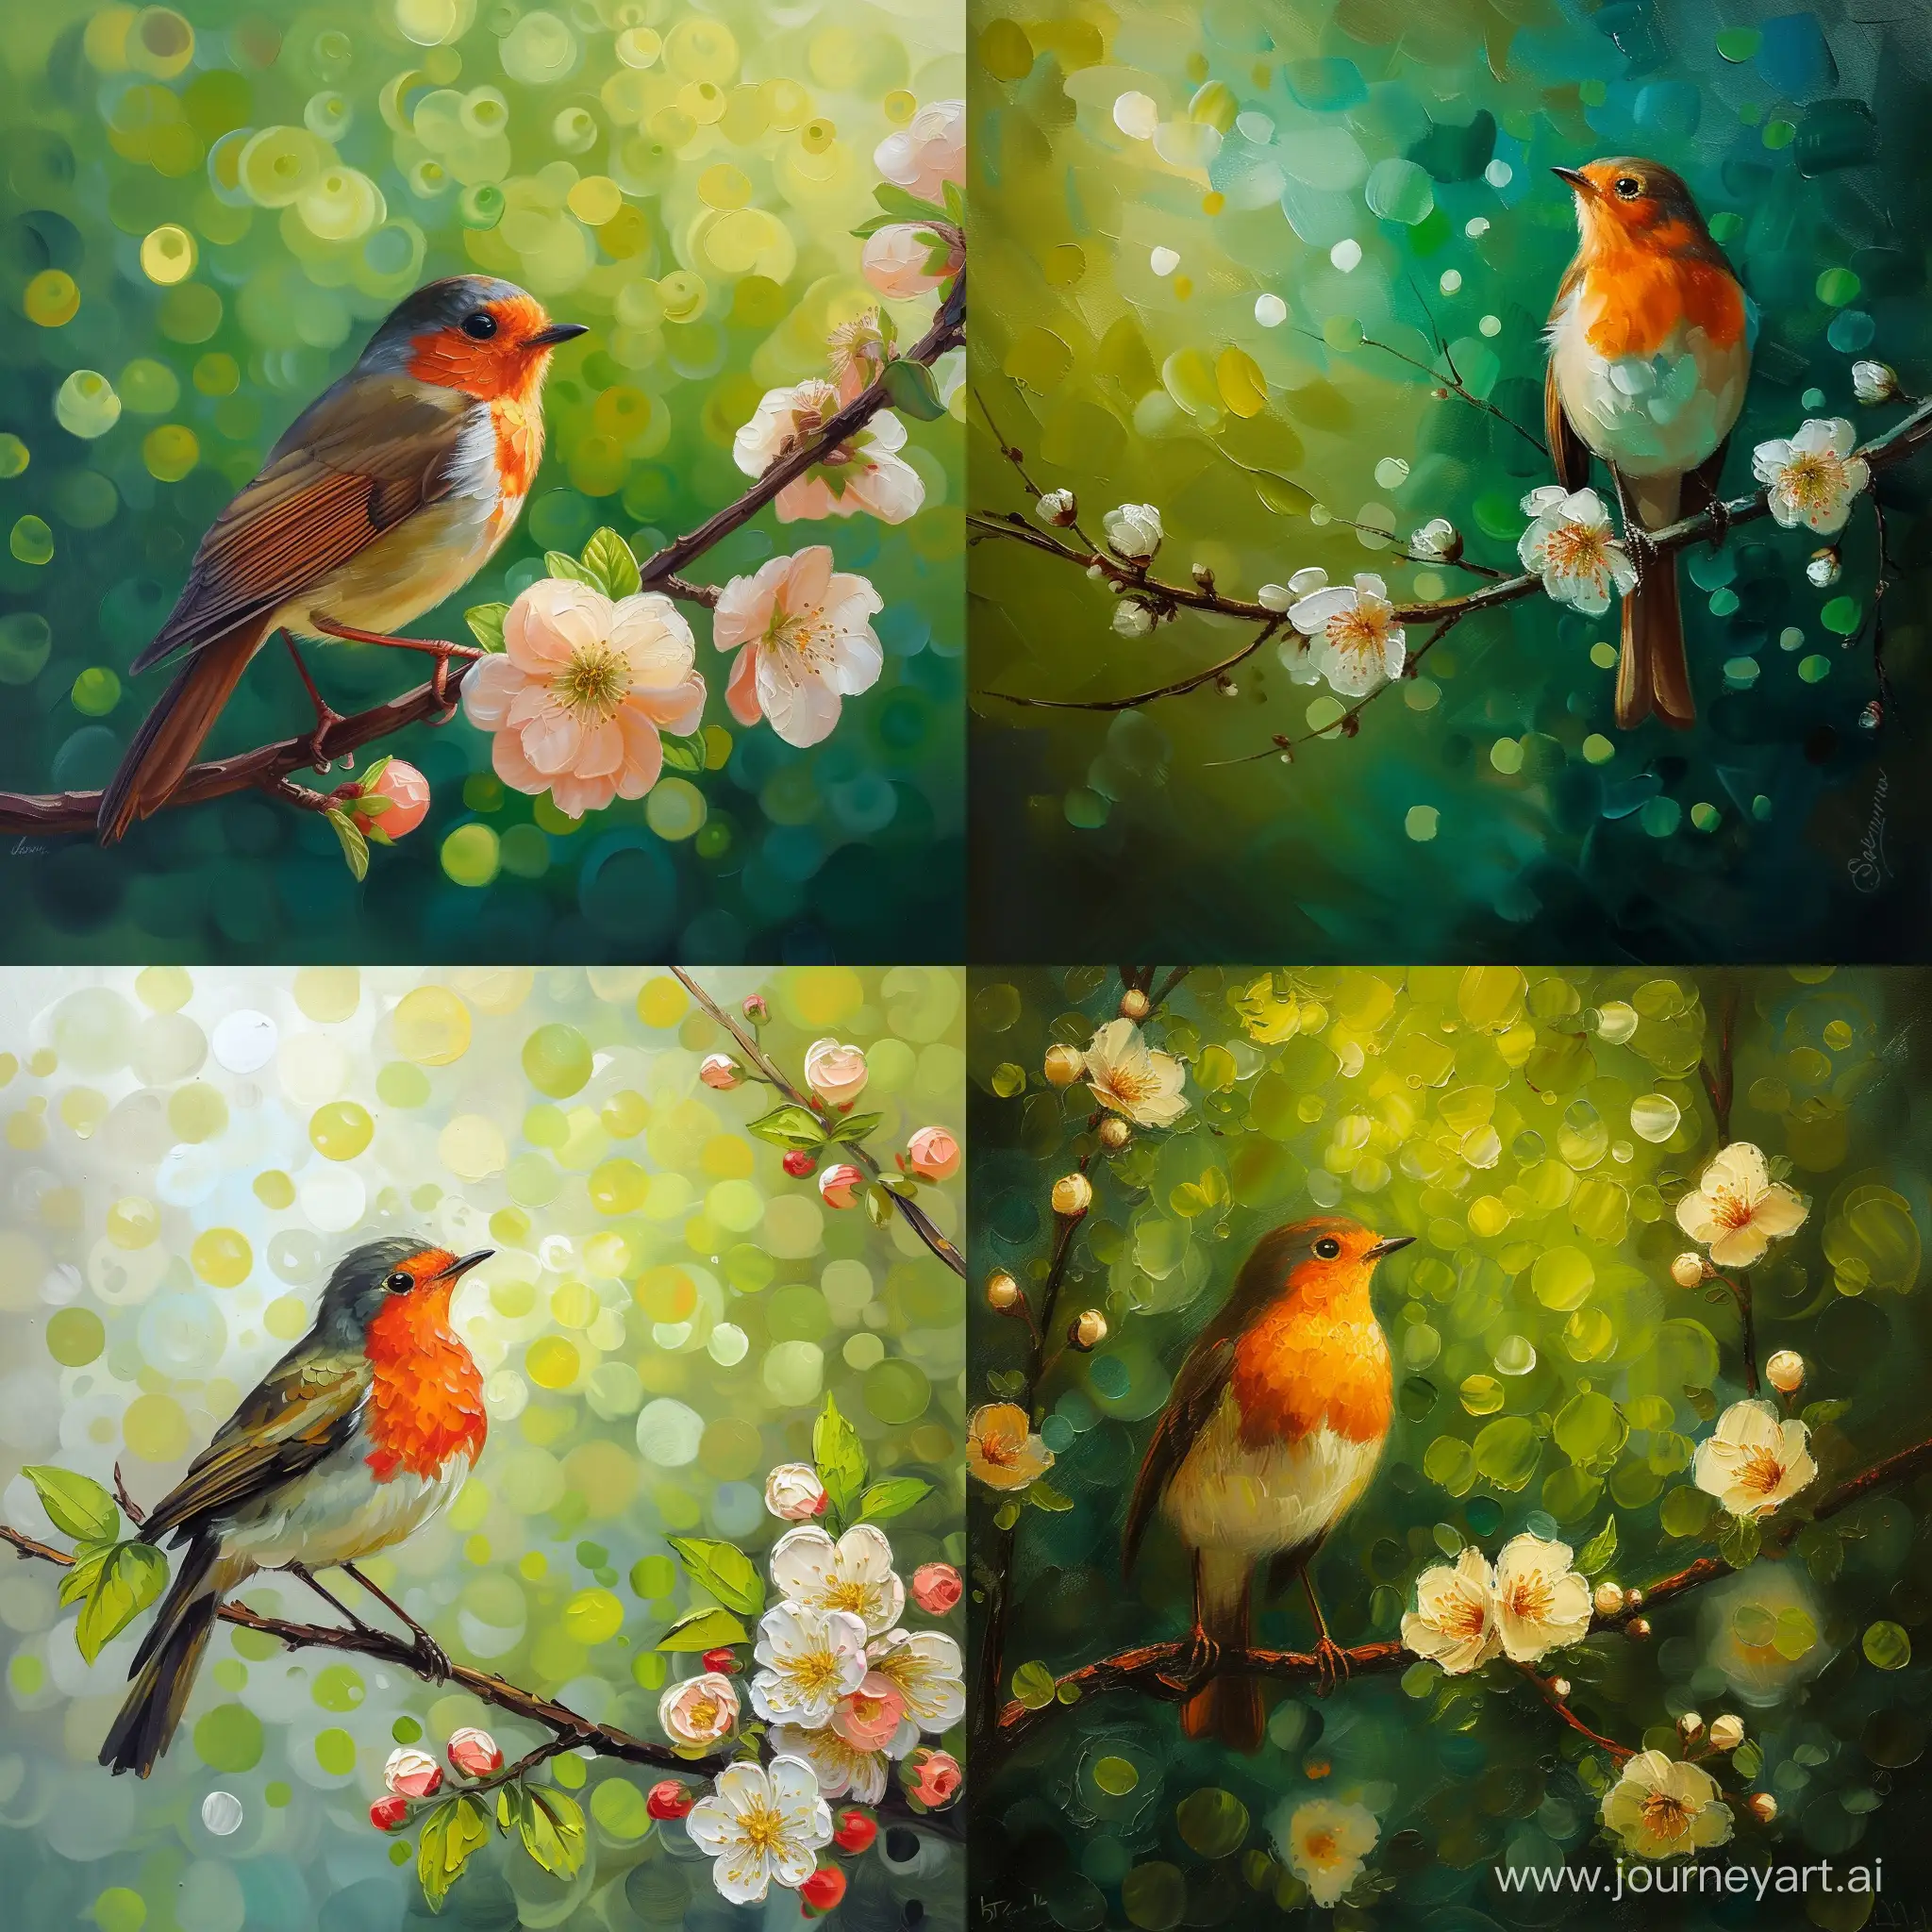 Oil-Painting-of-Robin-Bird-Amid-Blossom-Flowers-in-Olive-Green-Bokeh-Background